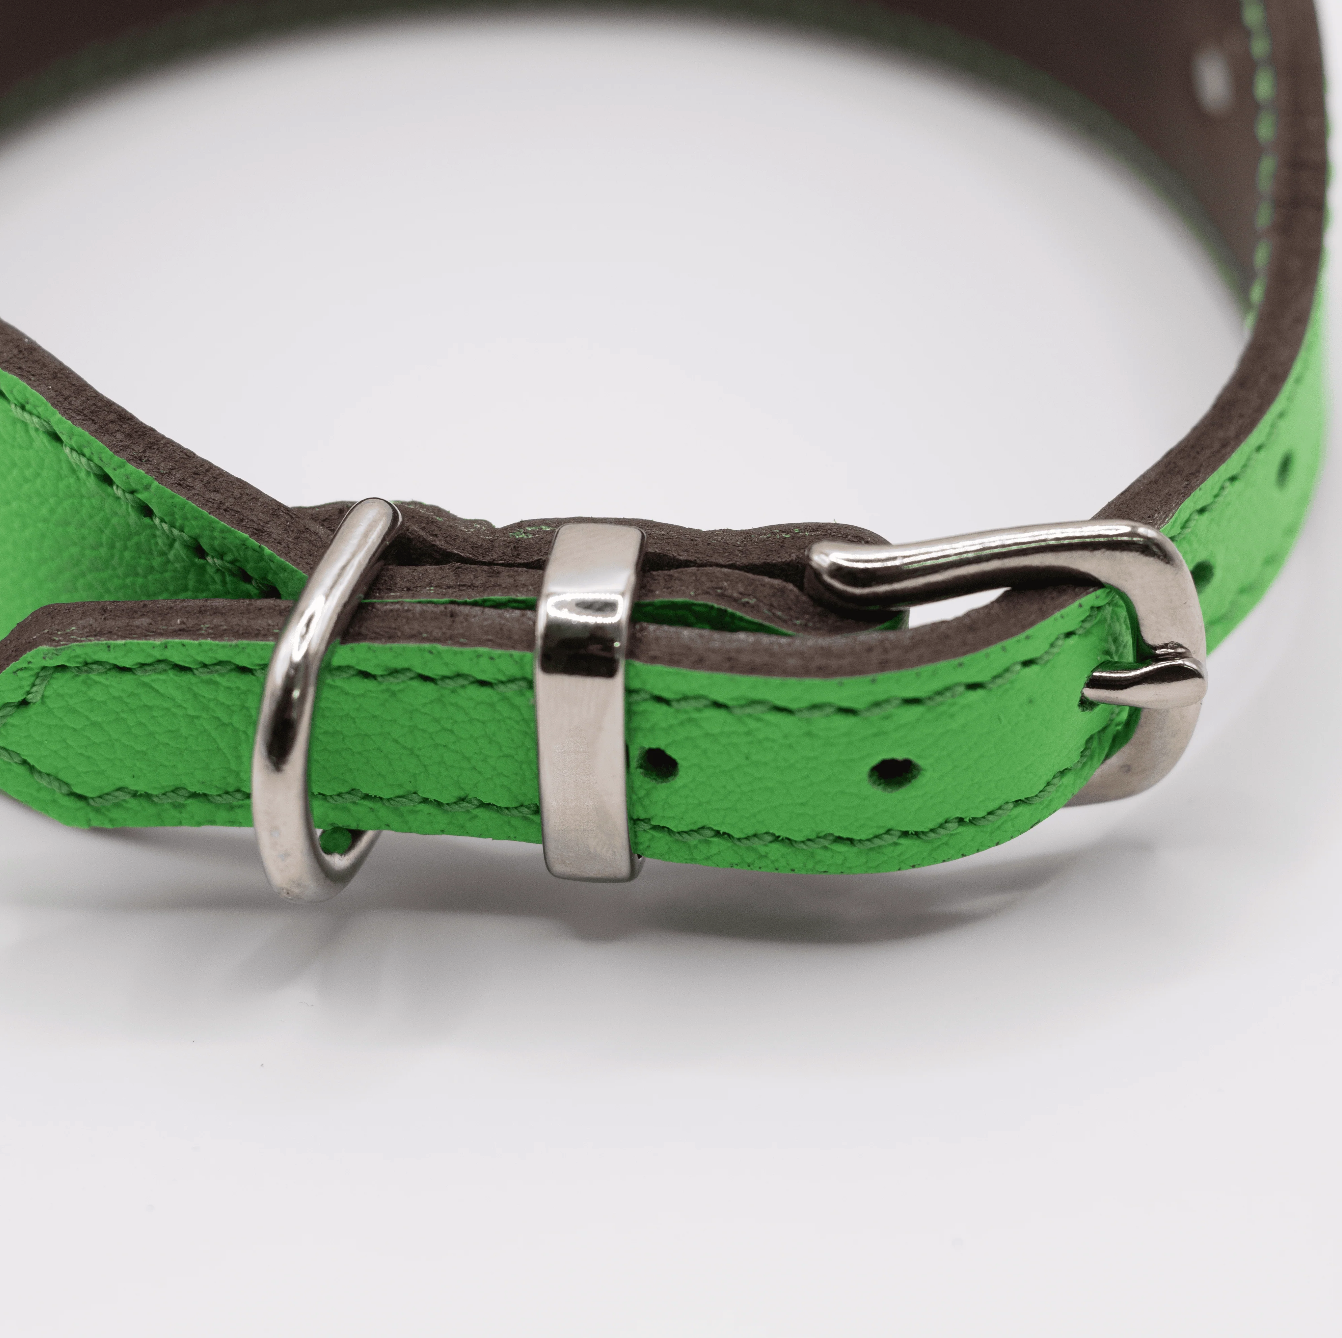 Flat and Wider Soft Leather Dog Collar Bright Green